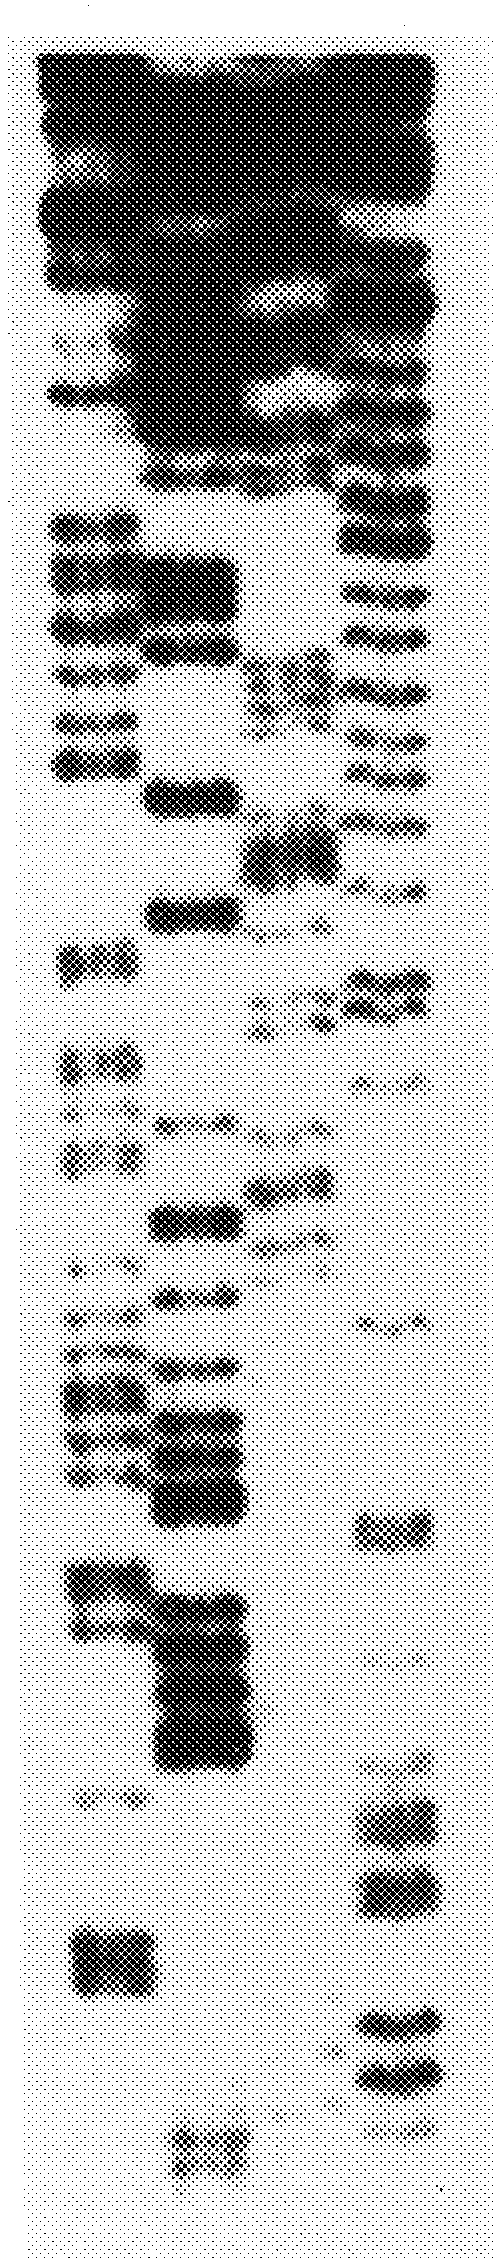 Method for determining DNA nucleotide sequence